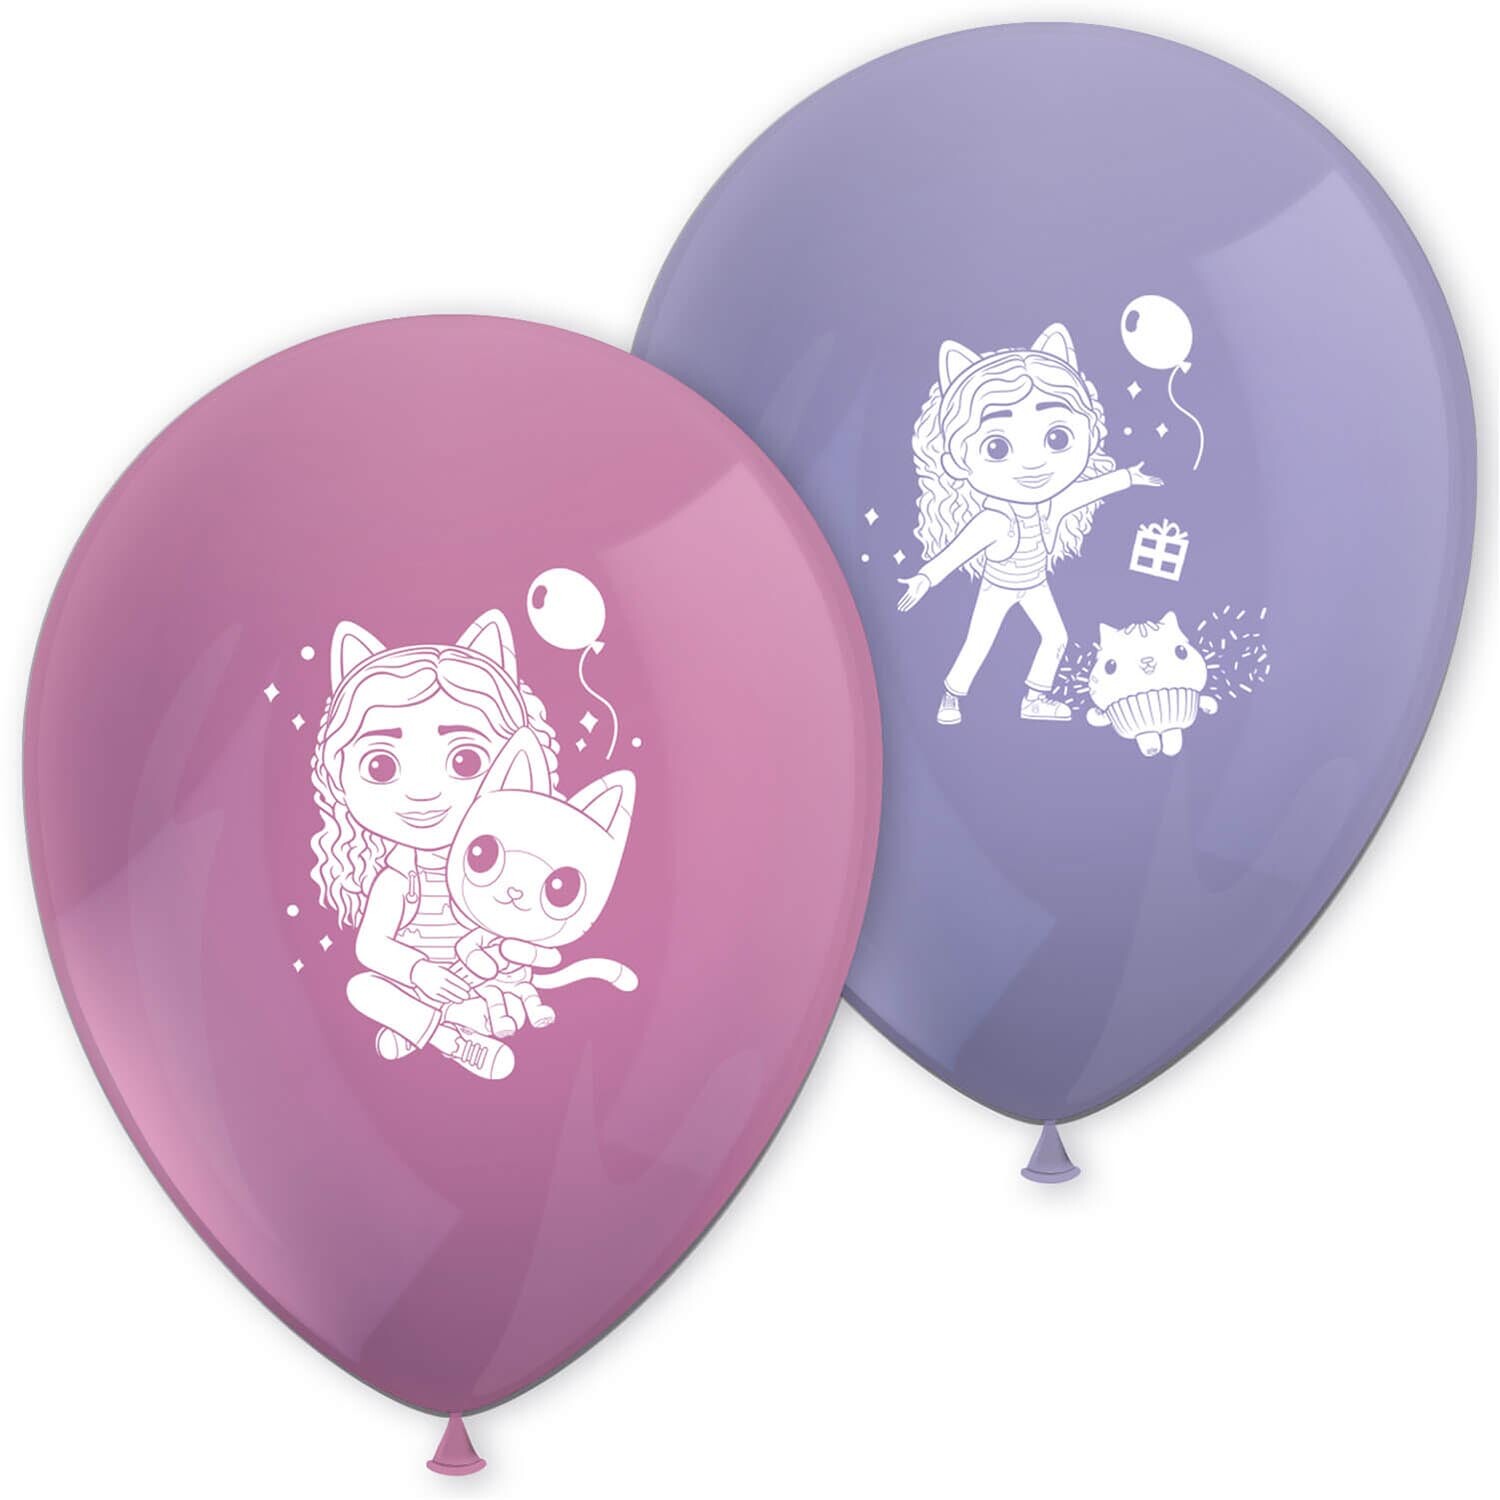 Gabby's Dollhouse Balloons 8 Pack Image